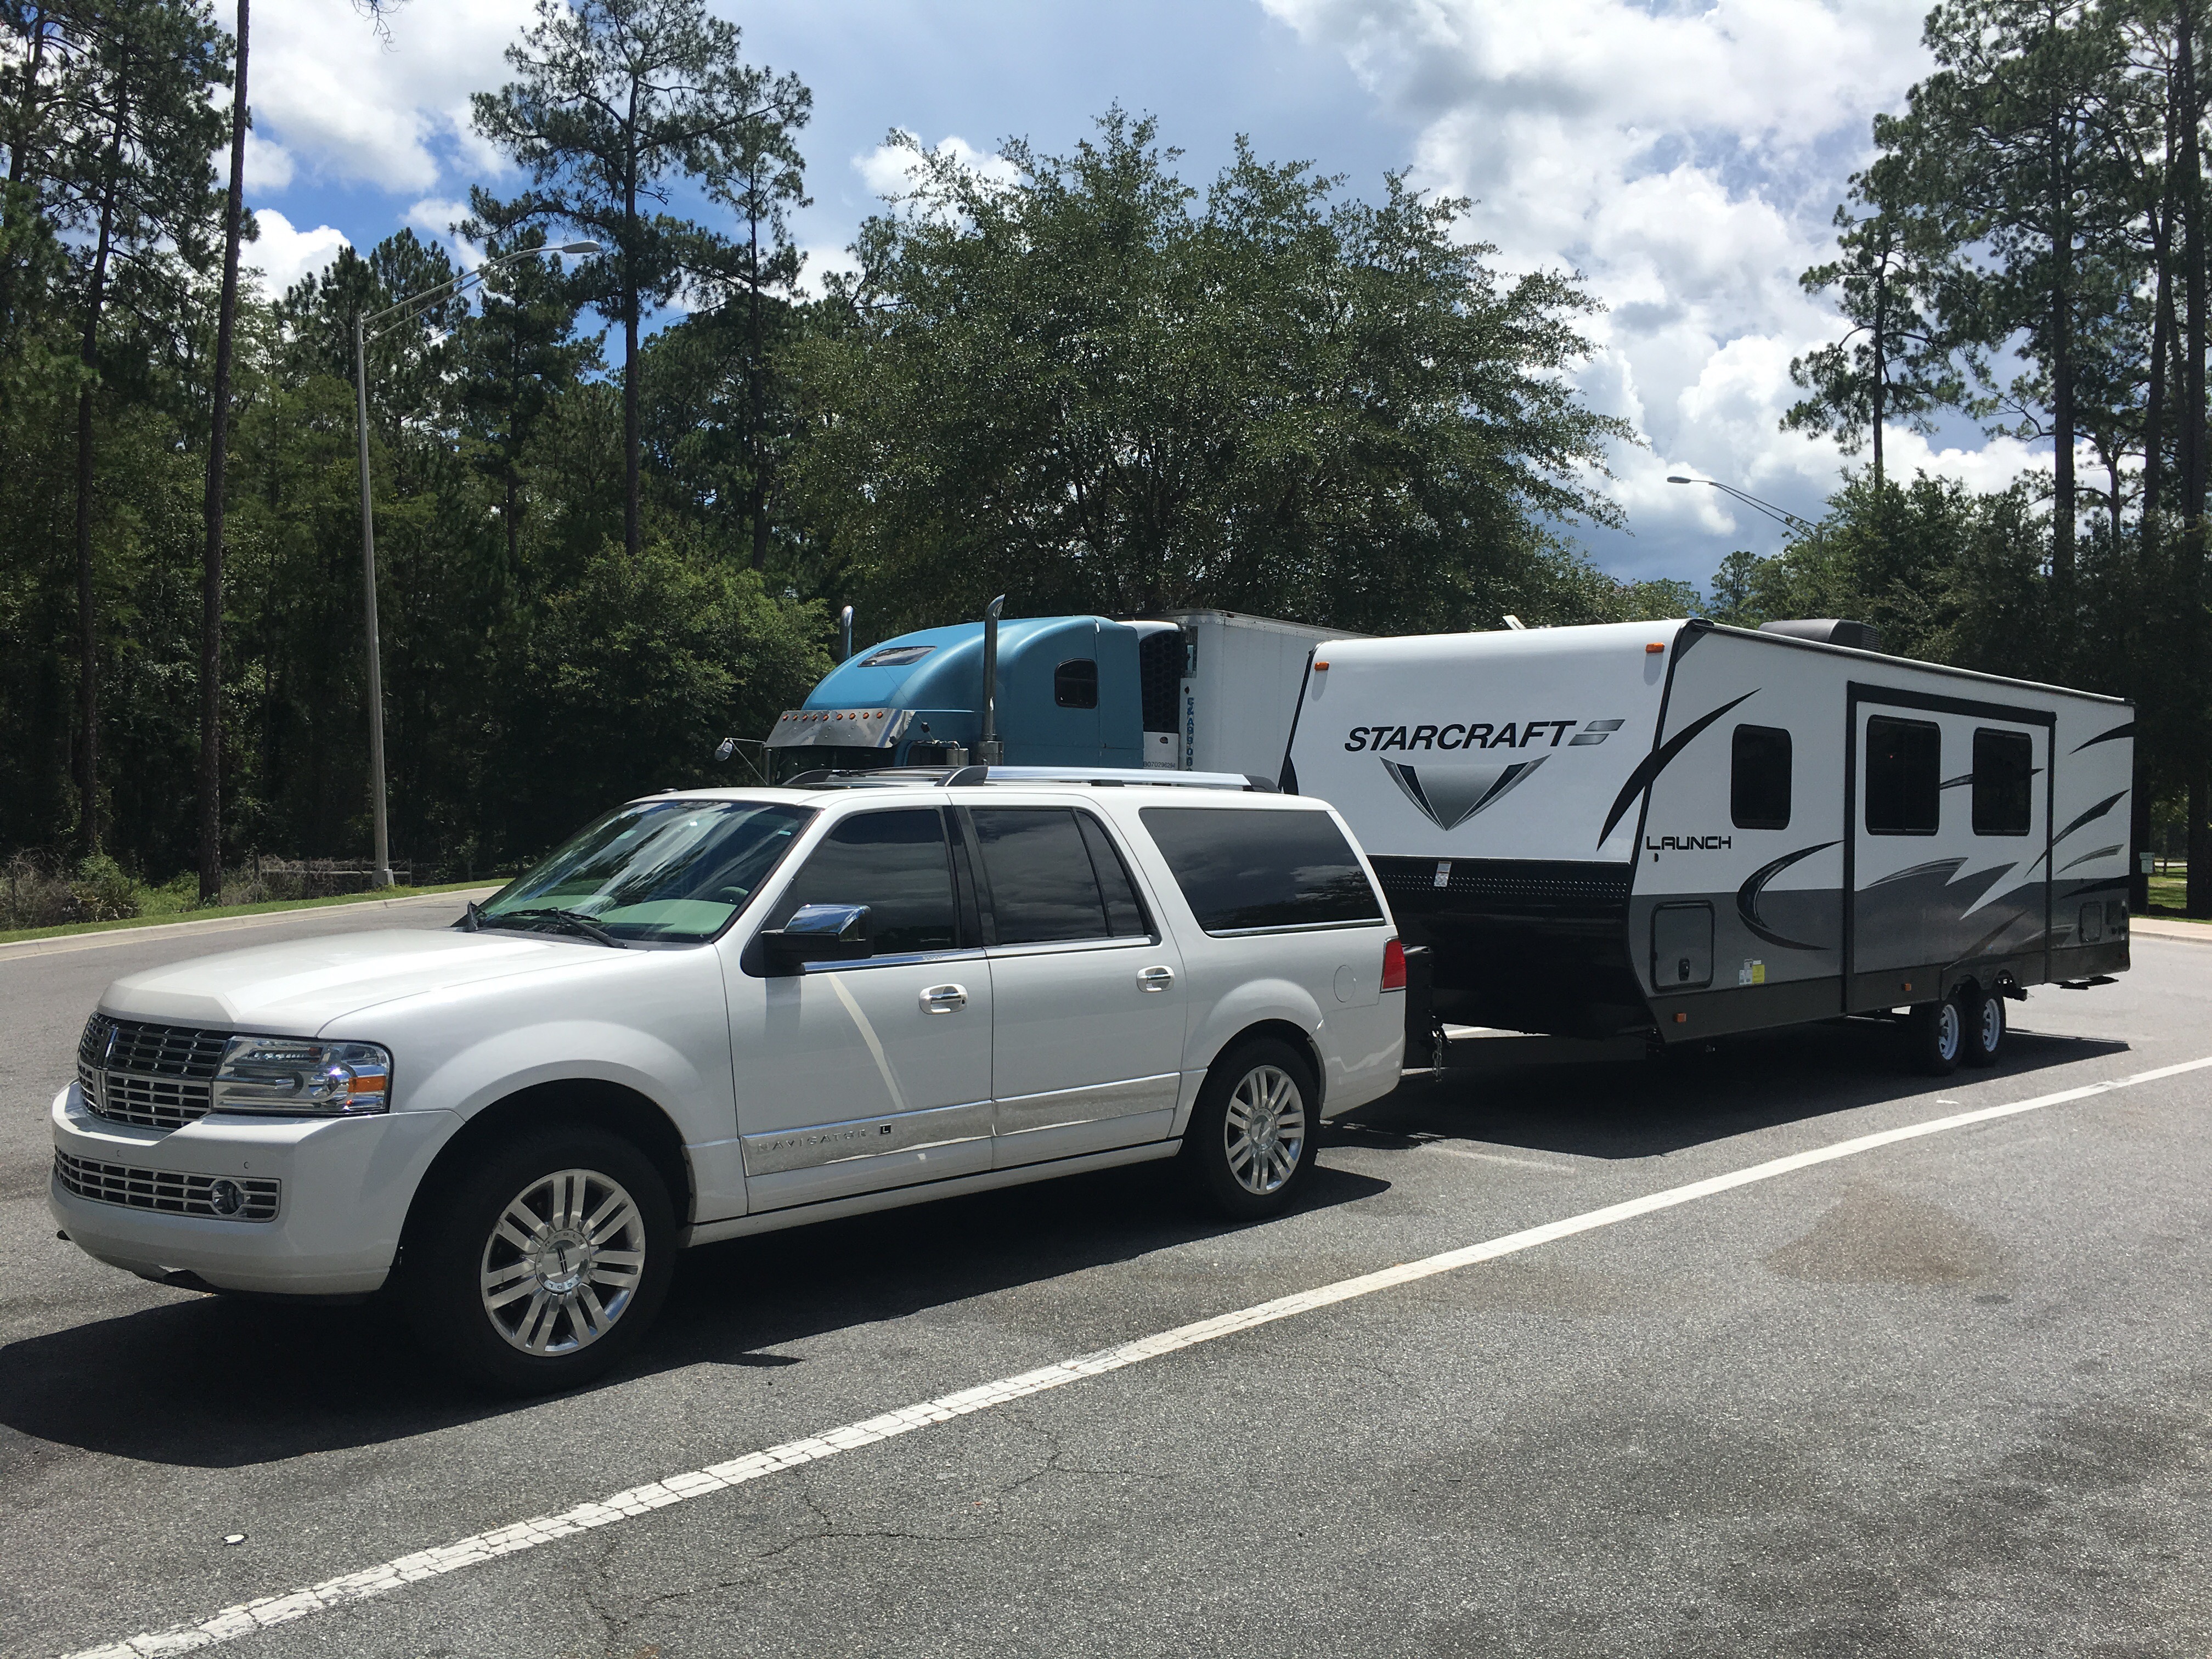 I 75 in GA. Tows as well as our smaller trailer.